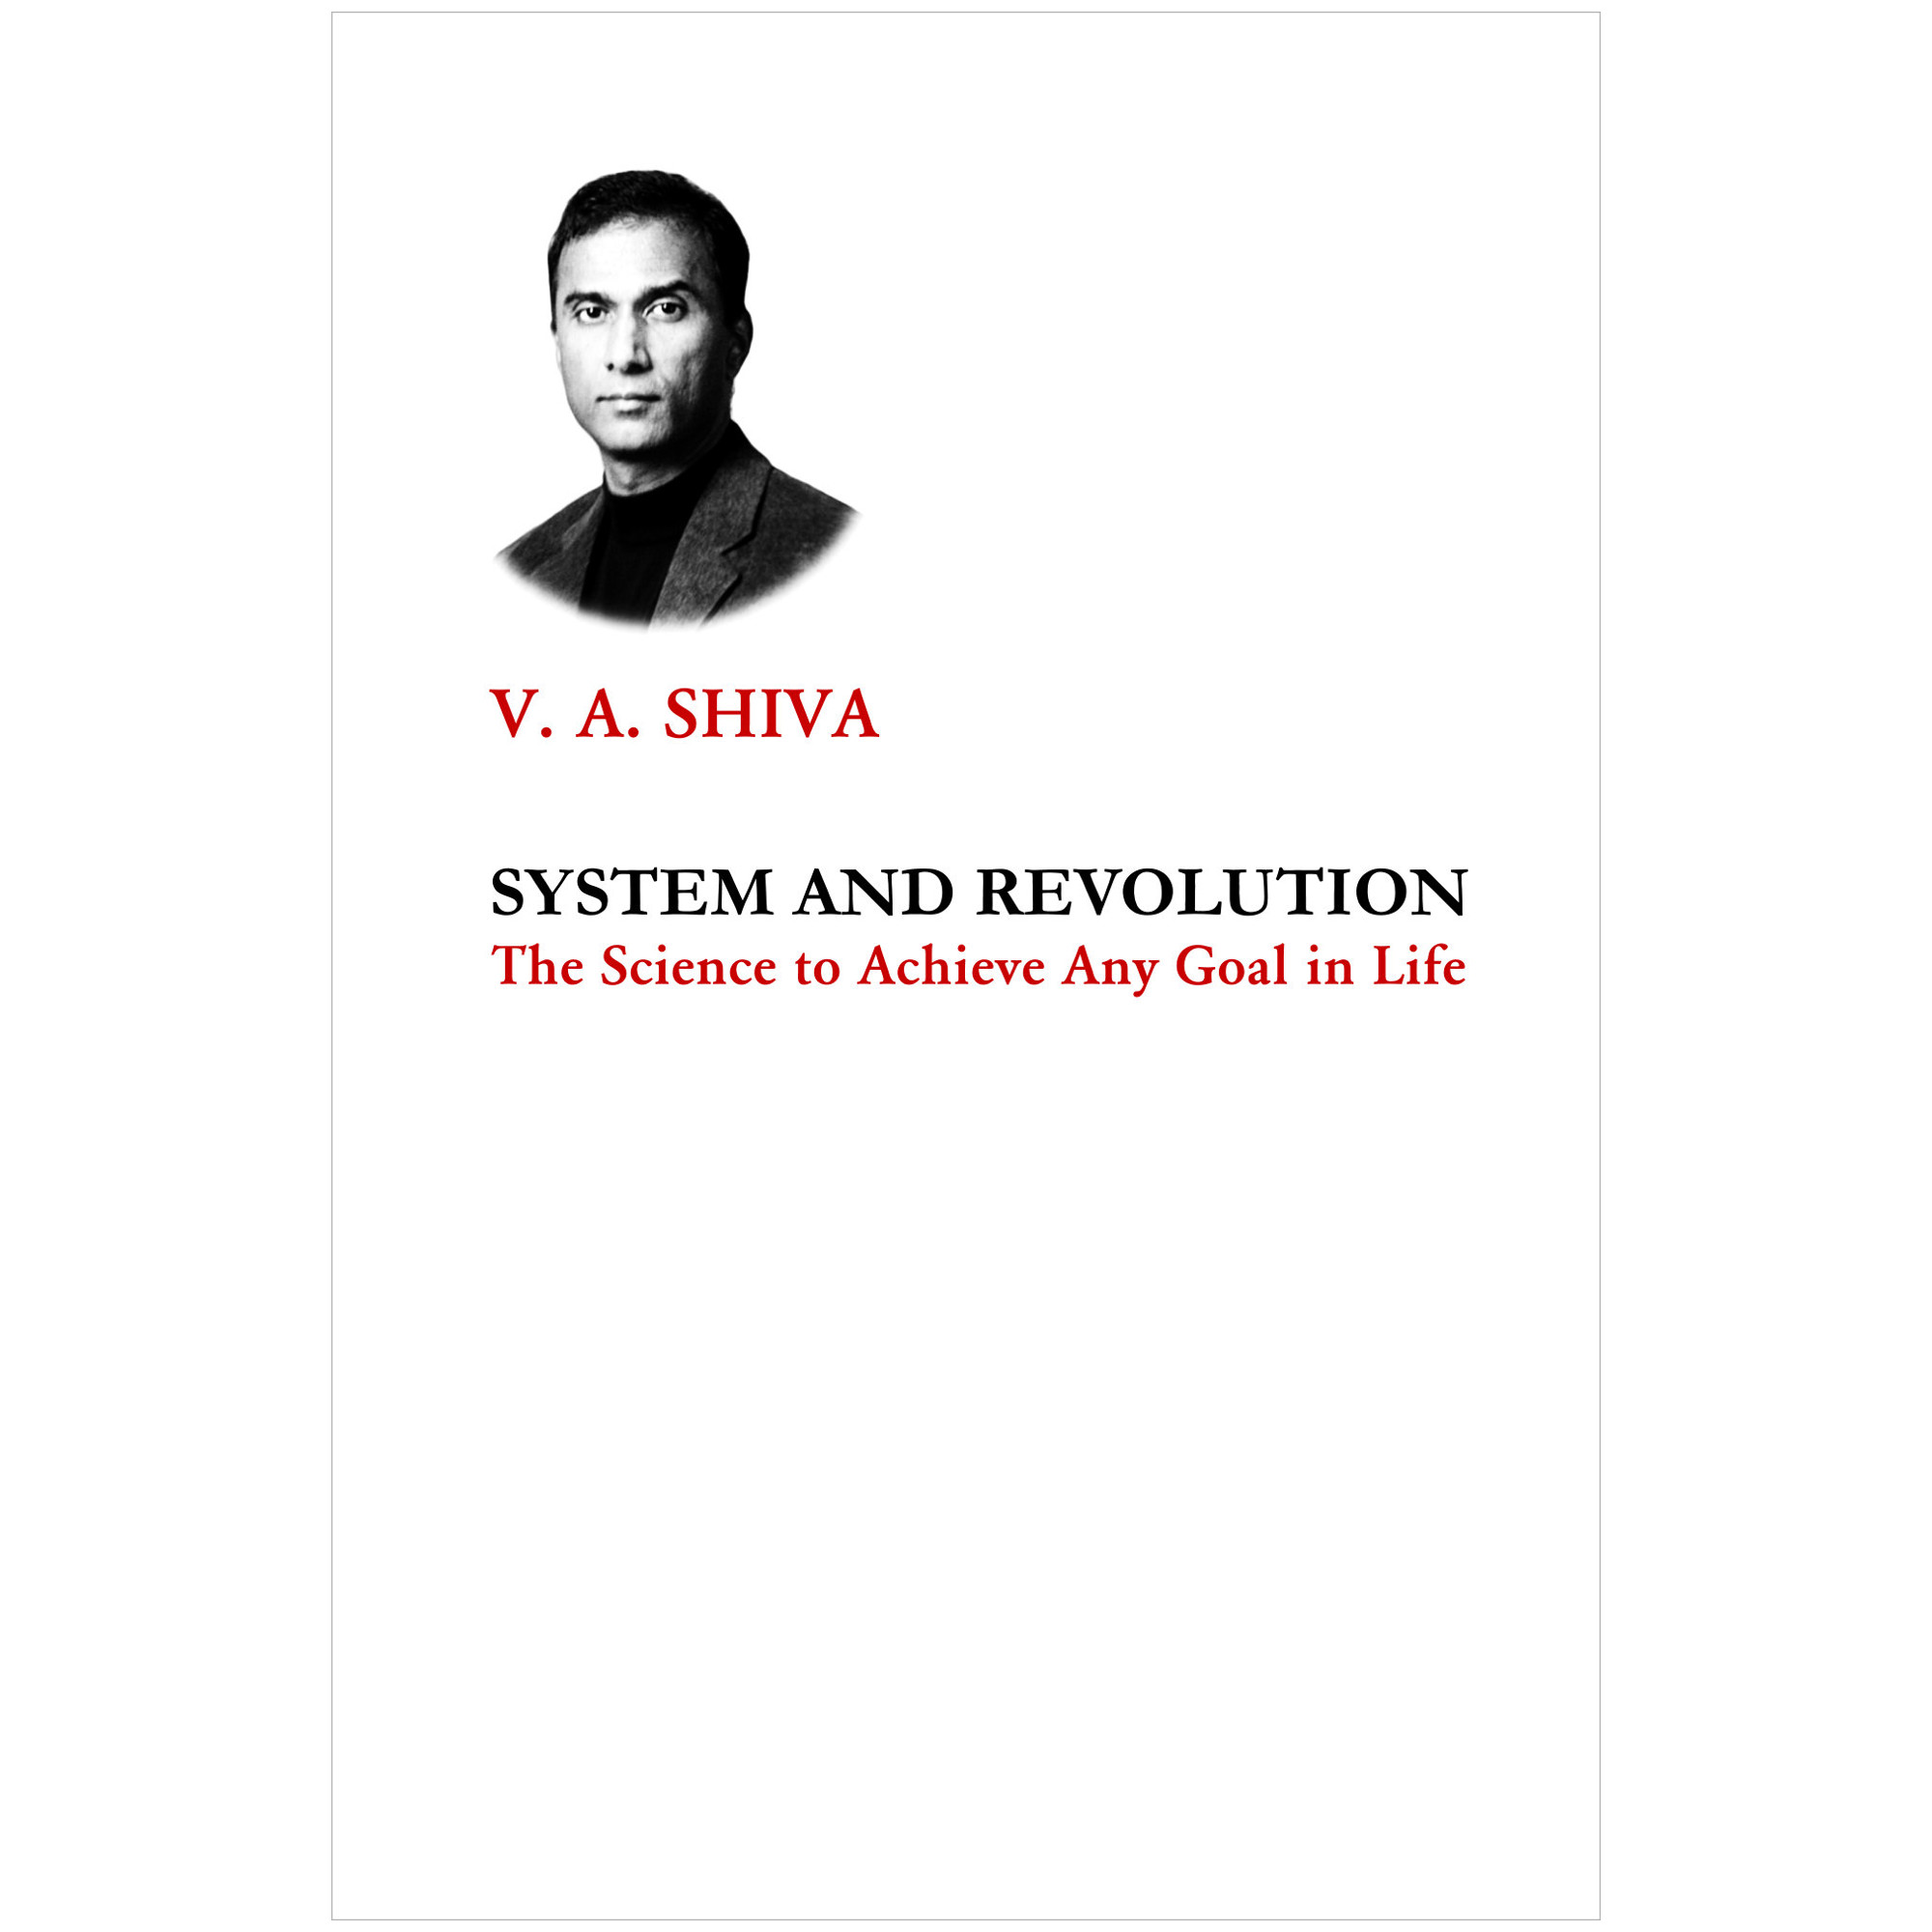 The System and Revolution